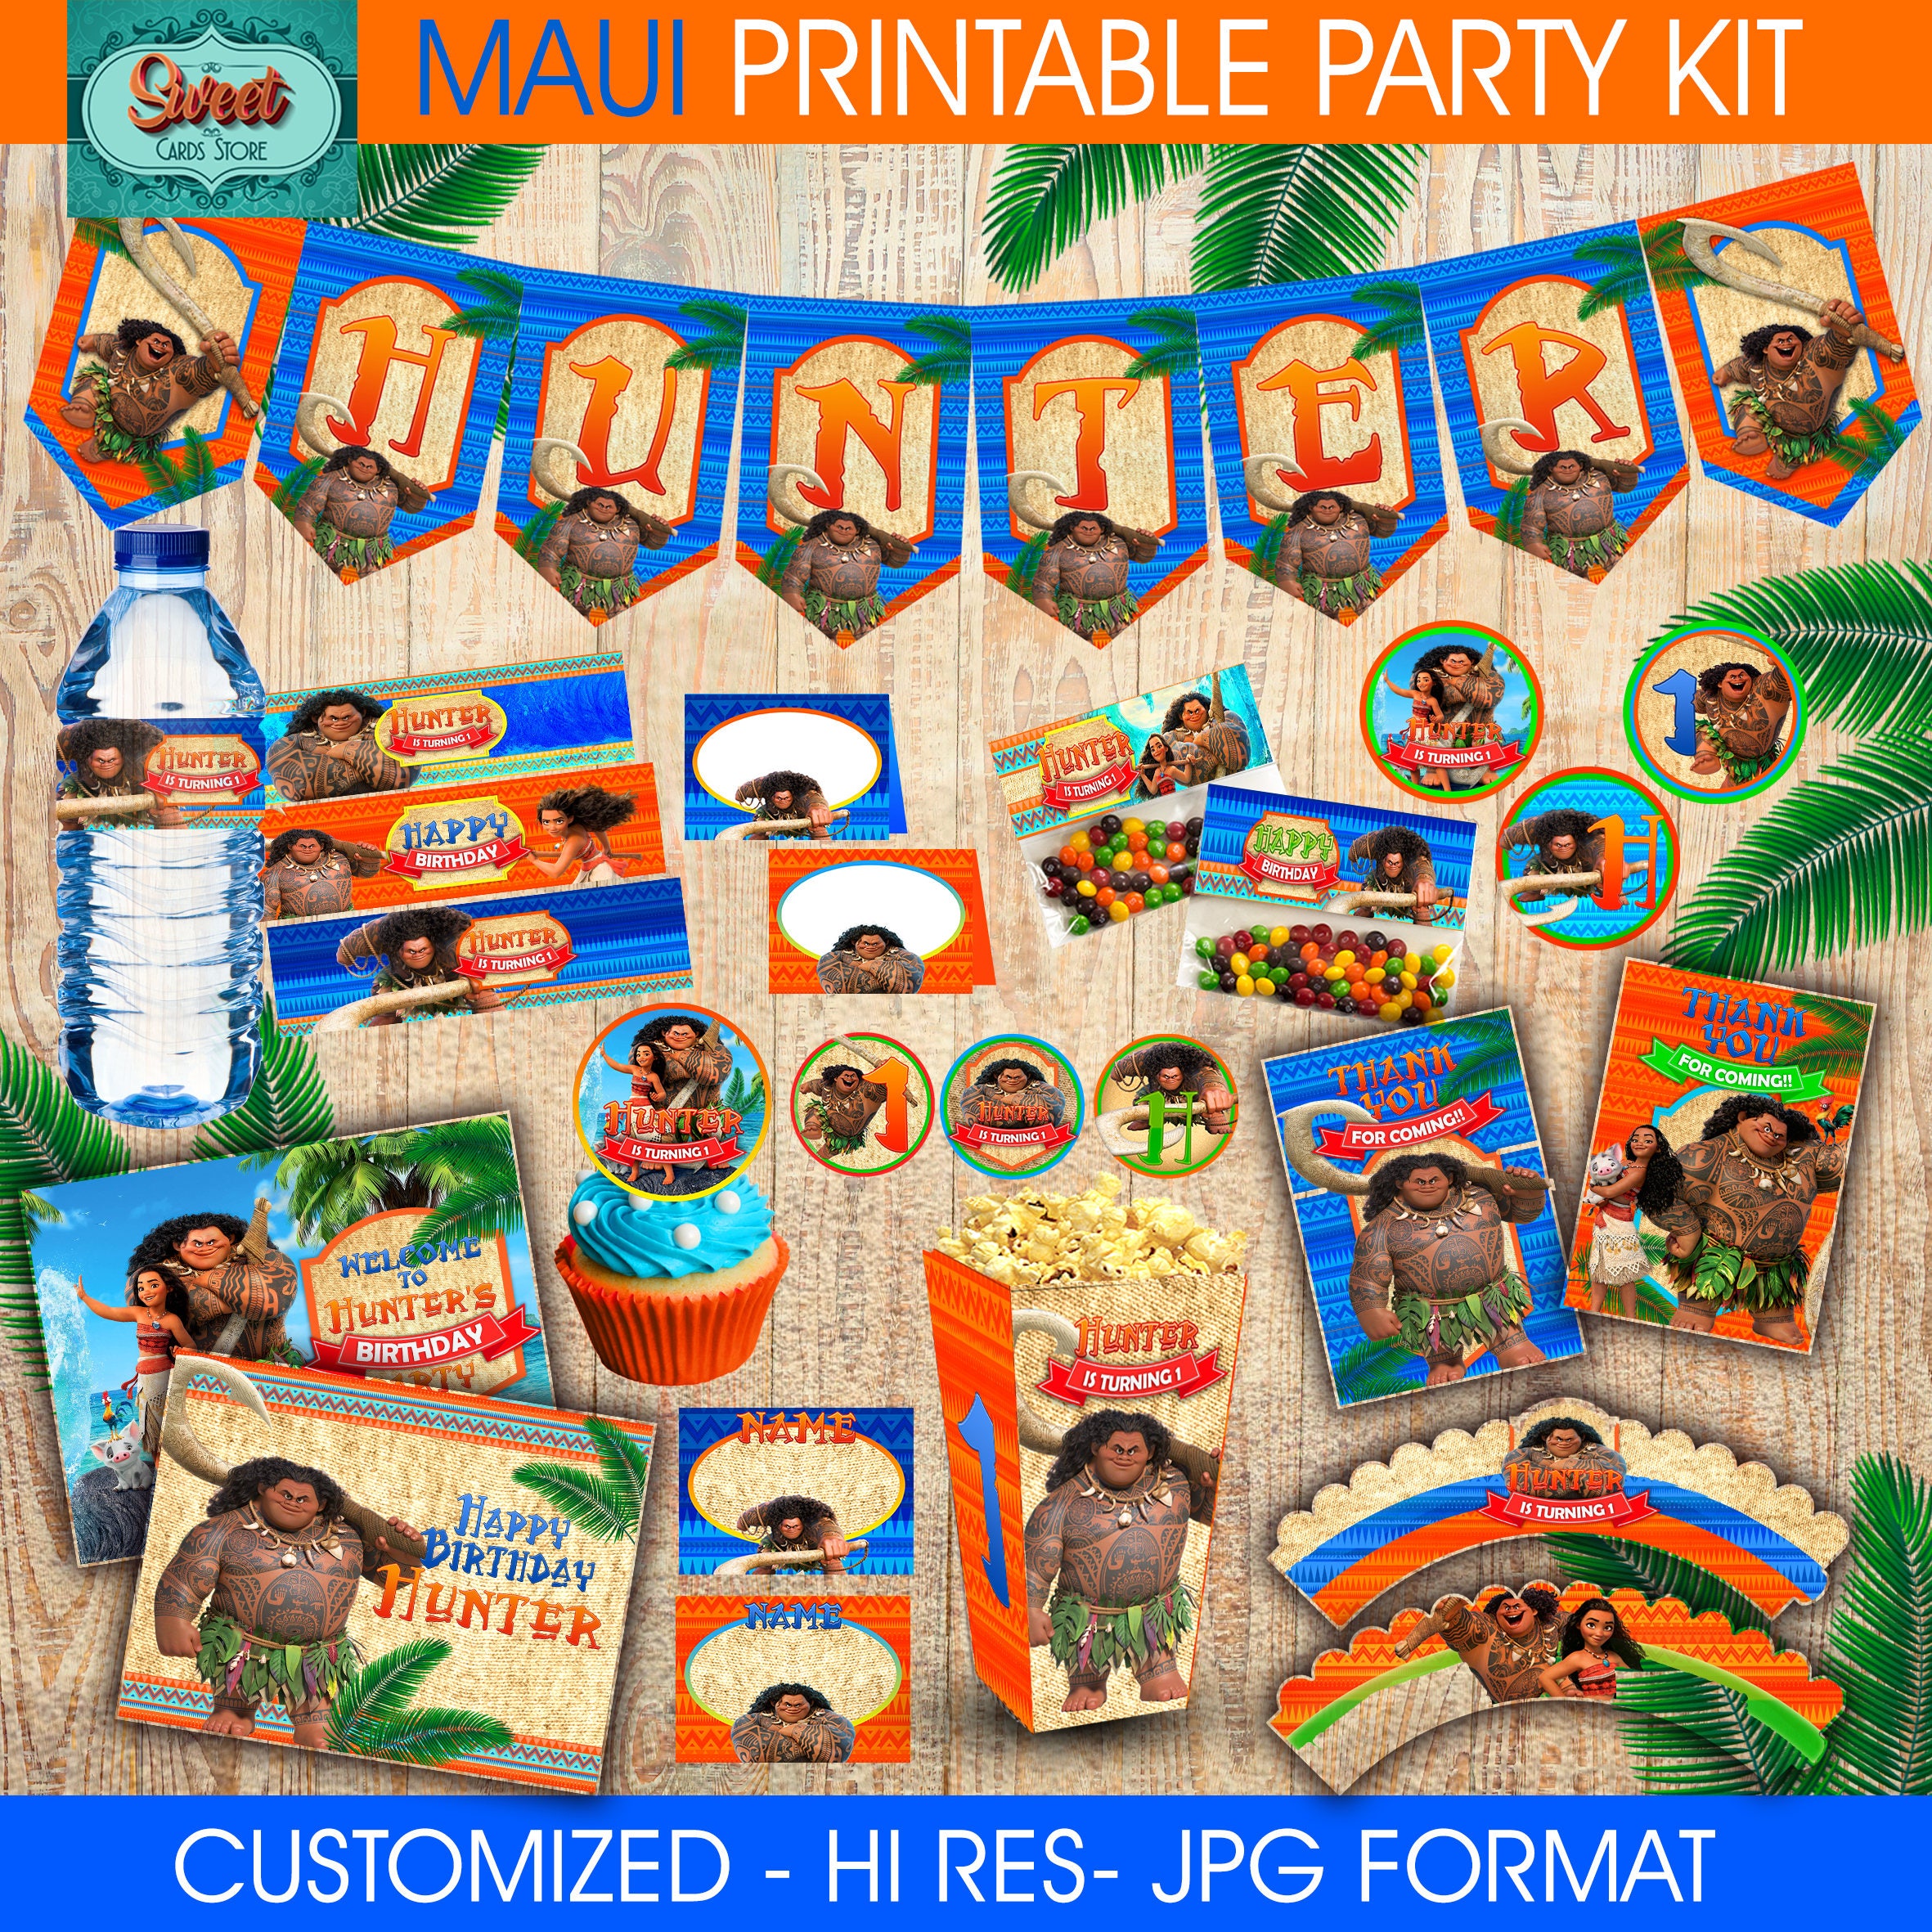 Maui party personalized printable kit, moana customized, birthday, digital,  label, ocean, hawuai, aloha, water, wrappers, toppers, boxes